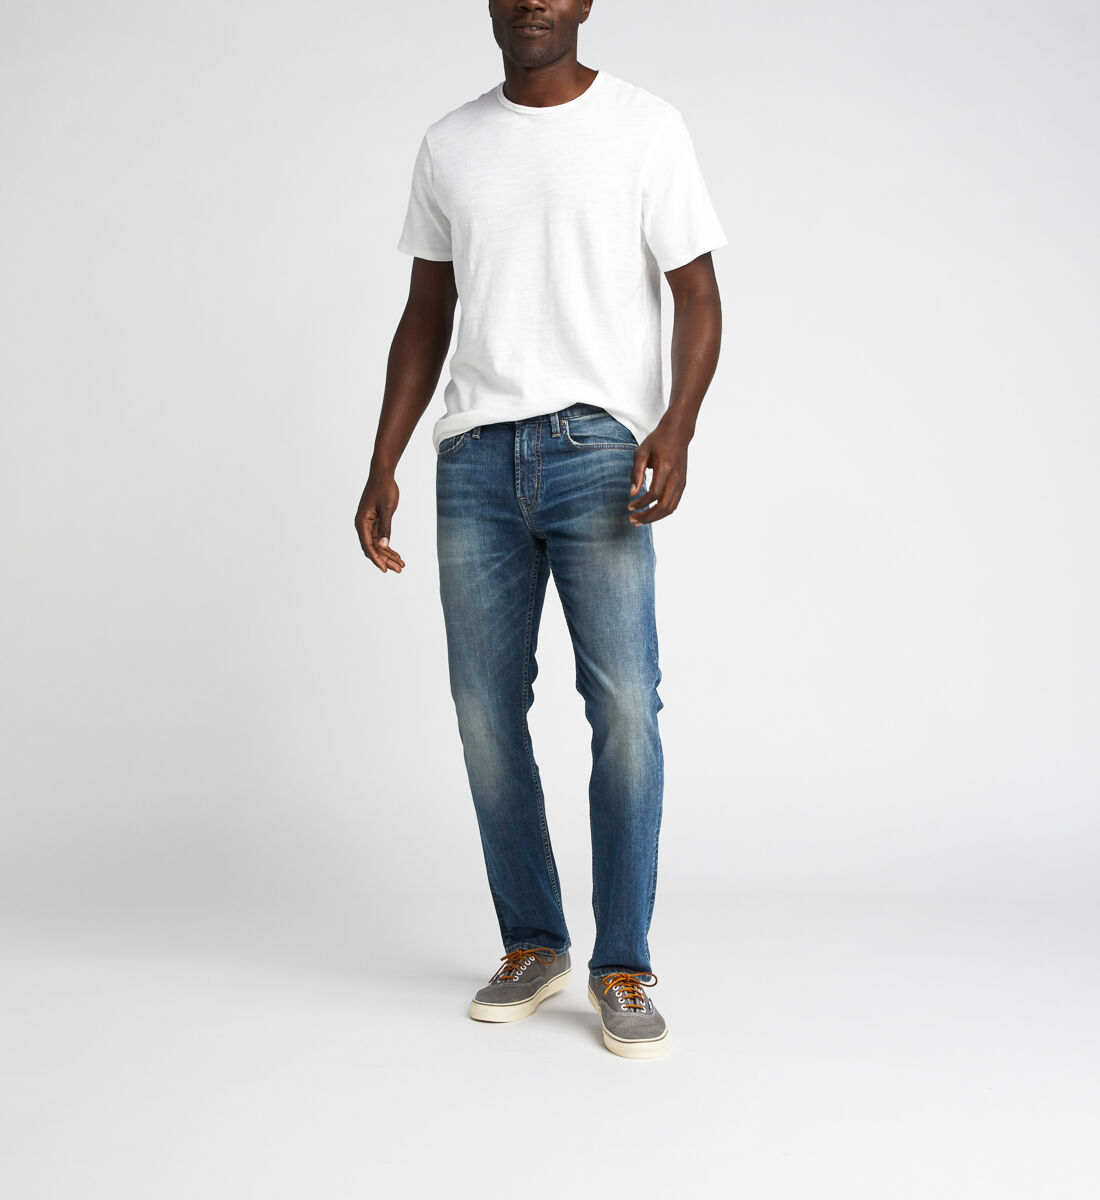 silver jeans sale clearance mens